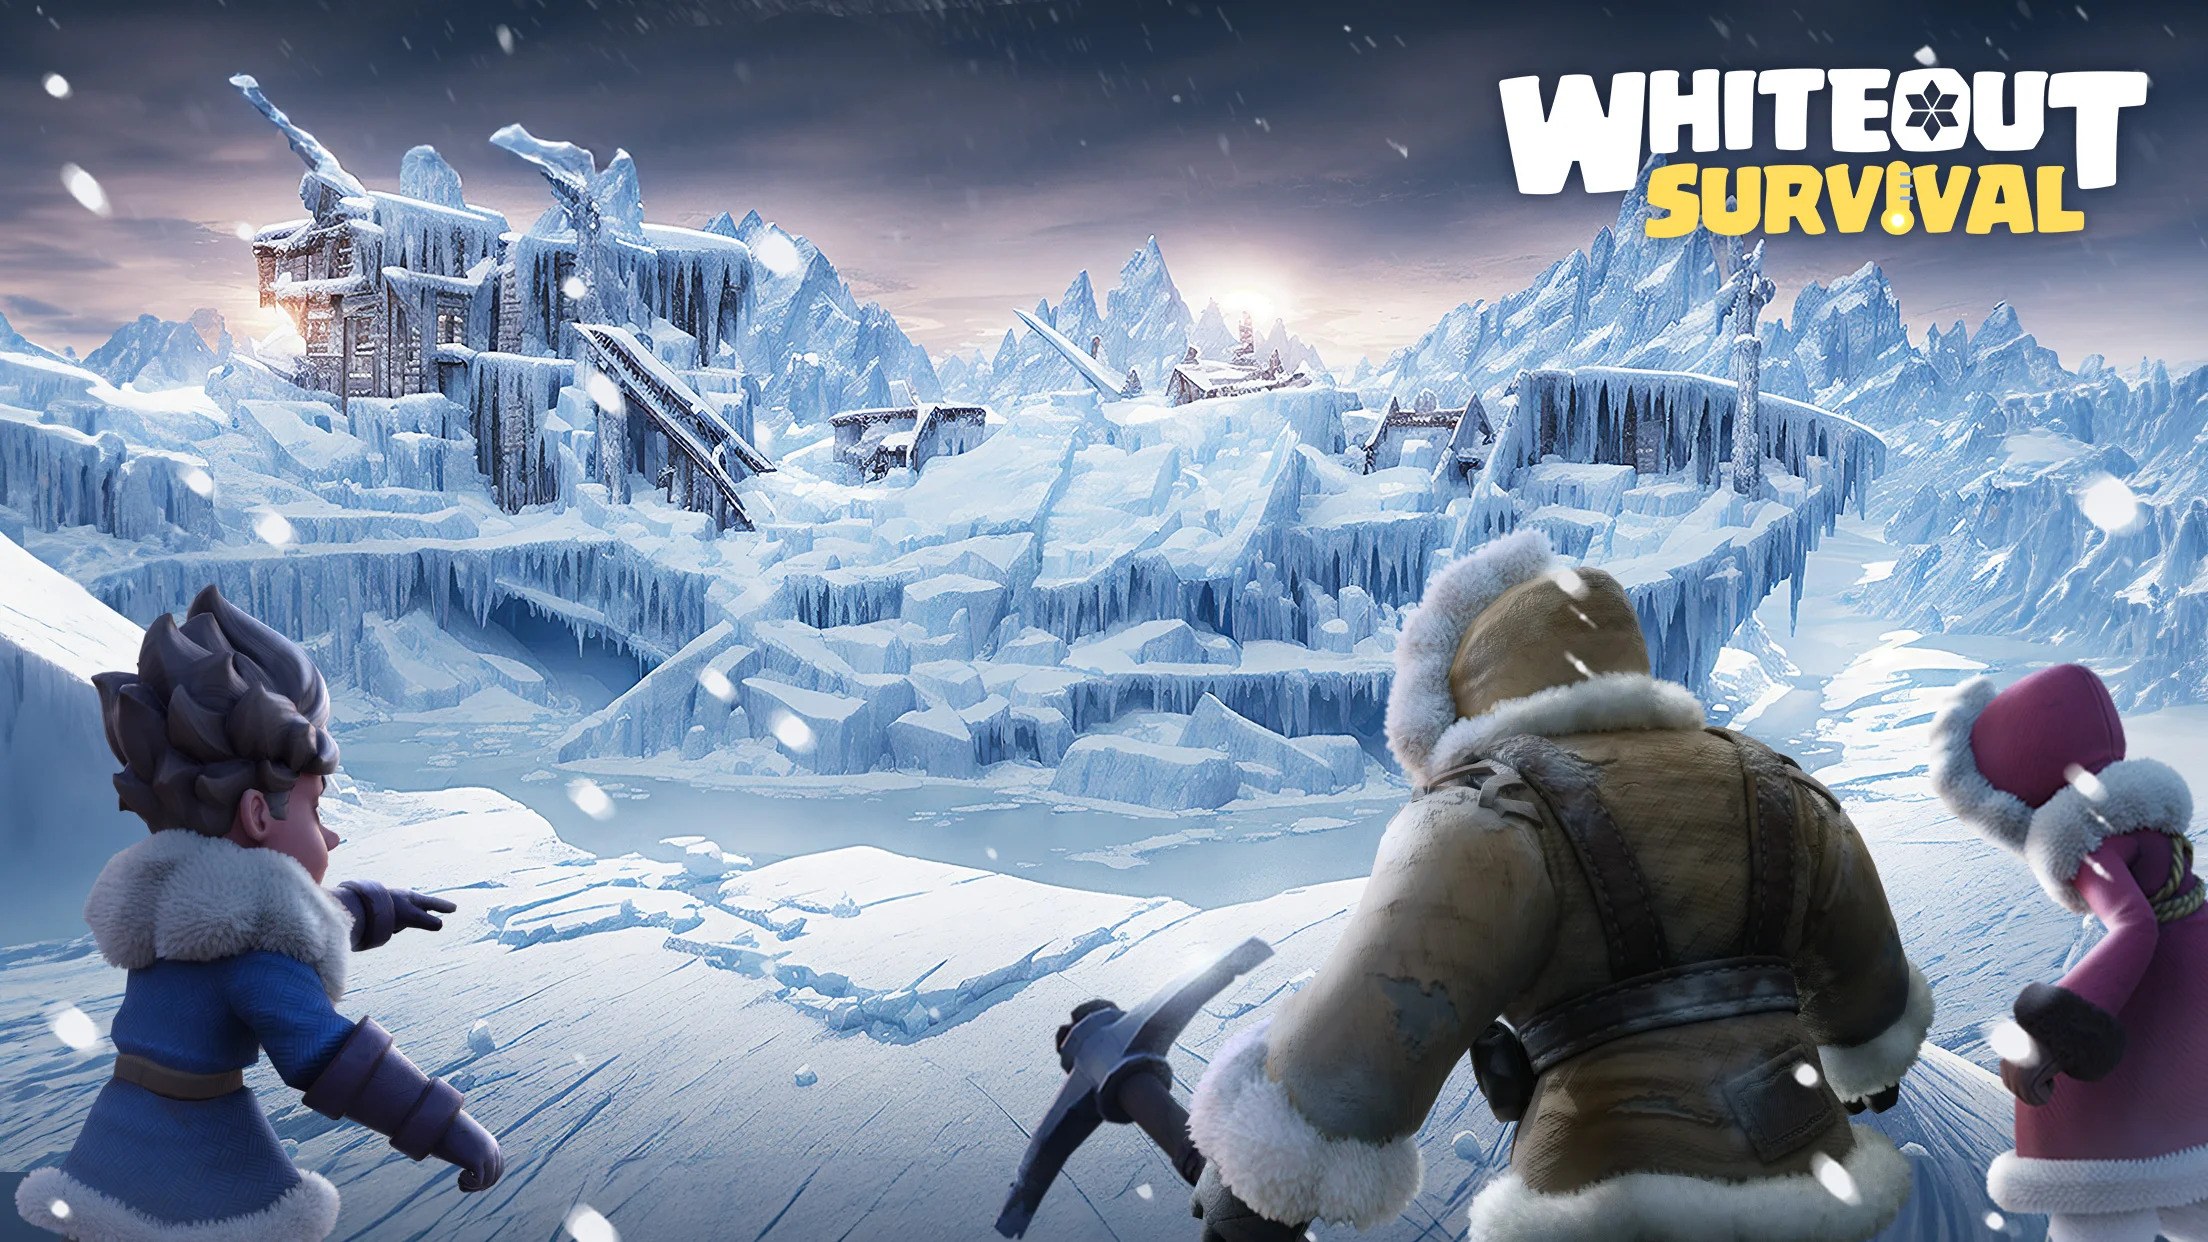 Whiteout Survival: Embracing the New Year in Tundra